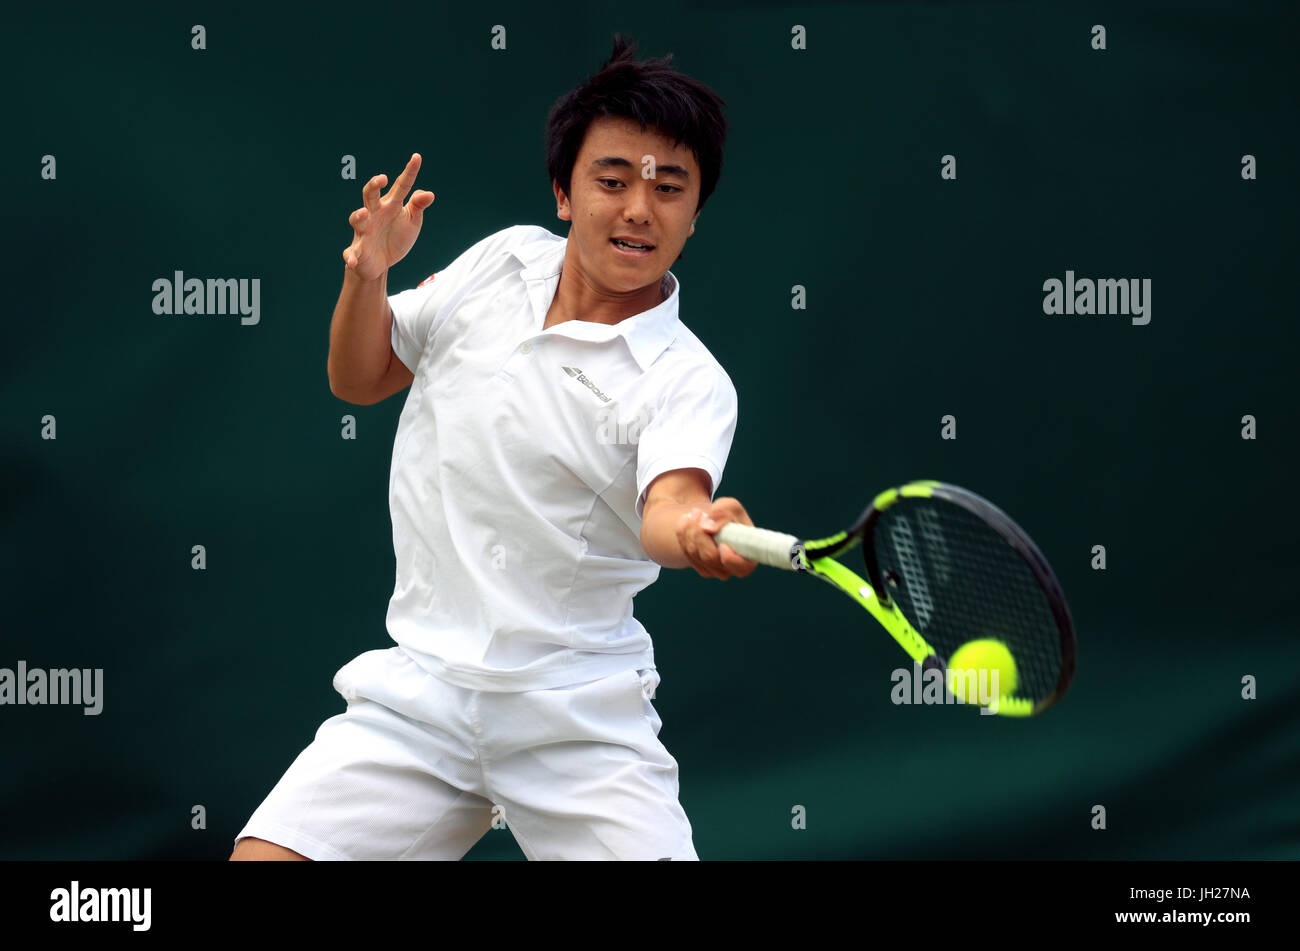 Yuta Shimizu in action in the boys singles on day Nine of the Wimbledon Championships at The All England Lawn Tennis and Croquet Club, Wimbledon